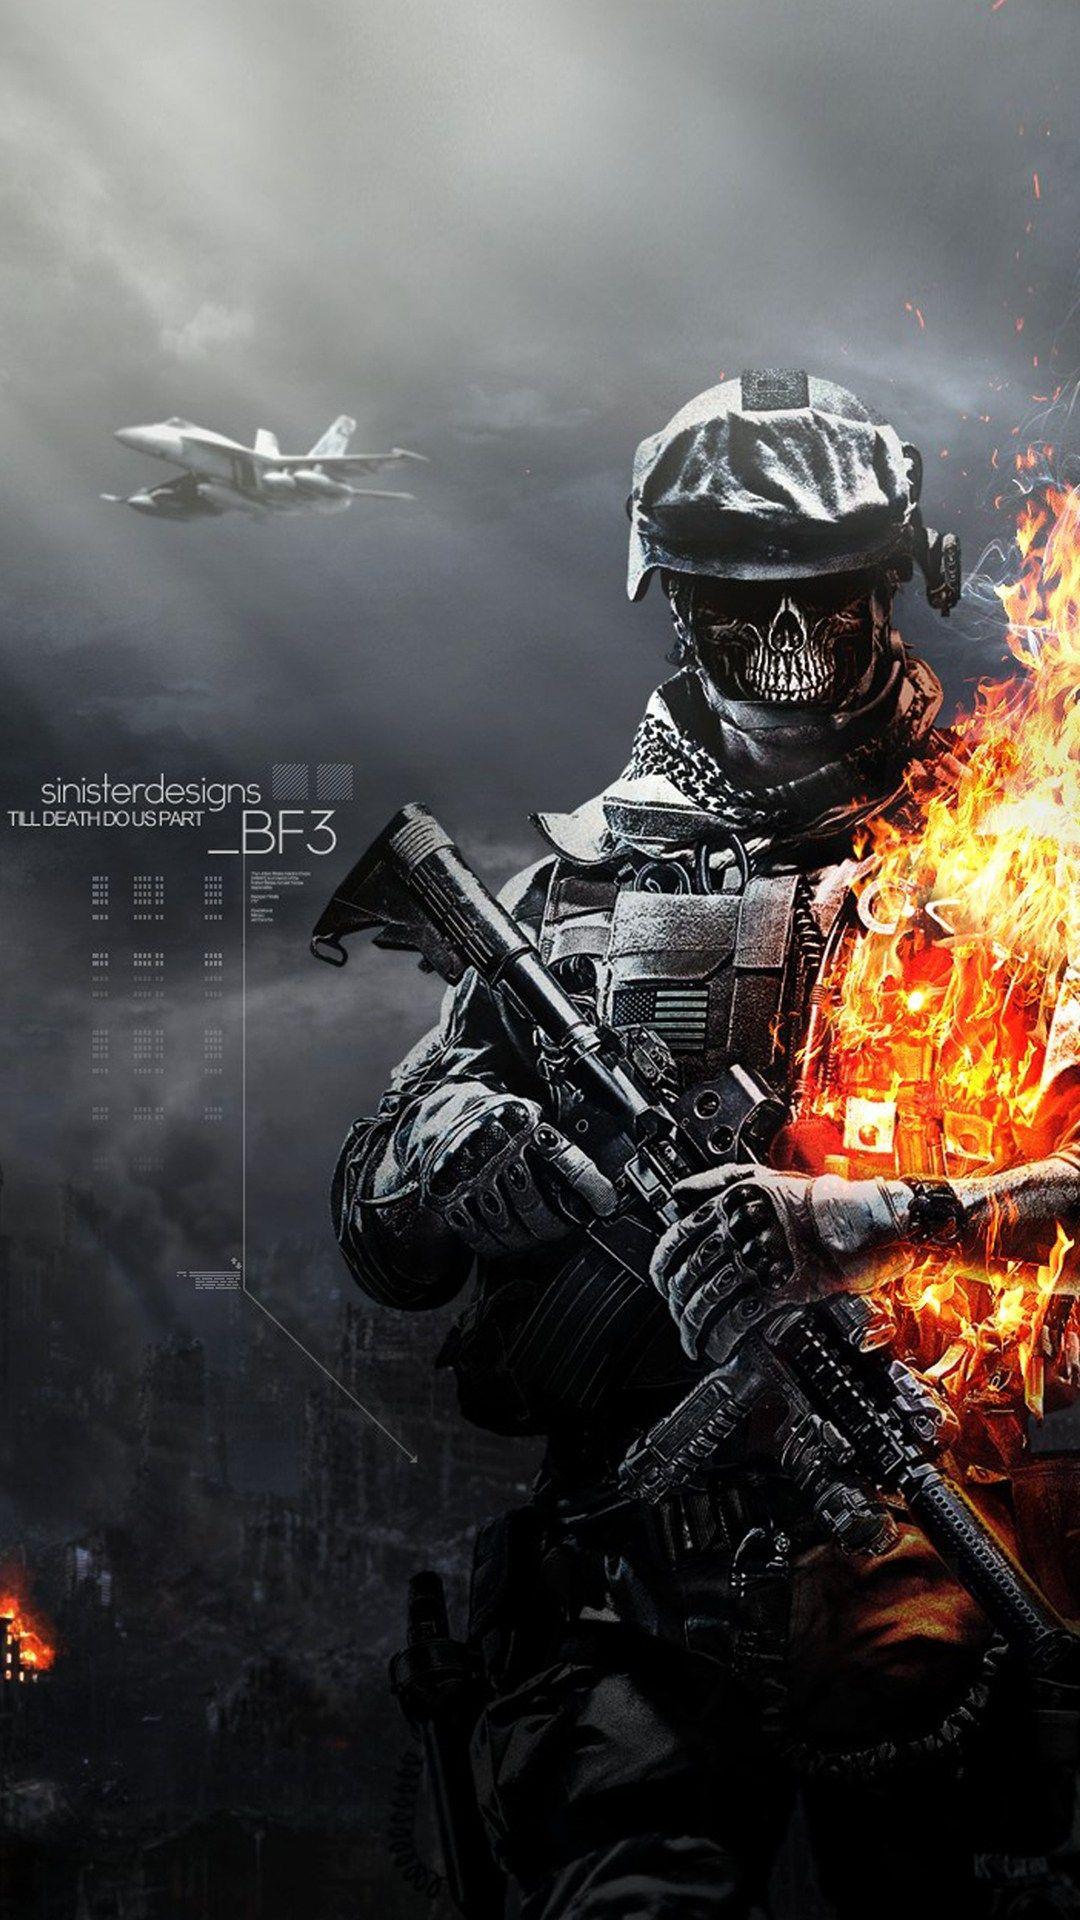 Badass Wallpaper For Android 02 0f 40 With Skull Soldier